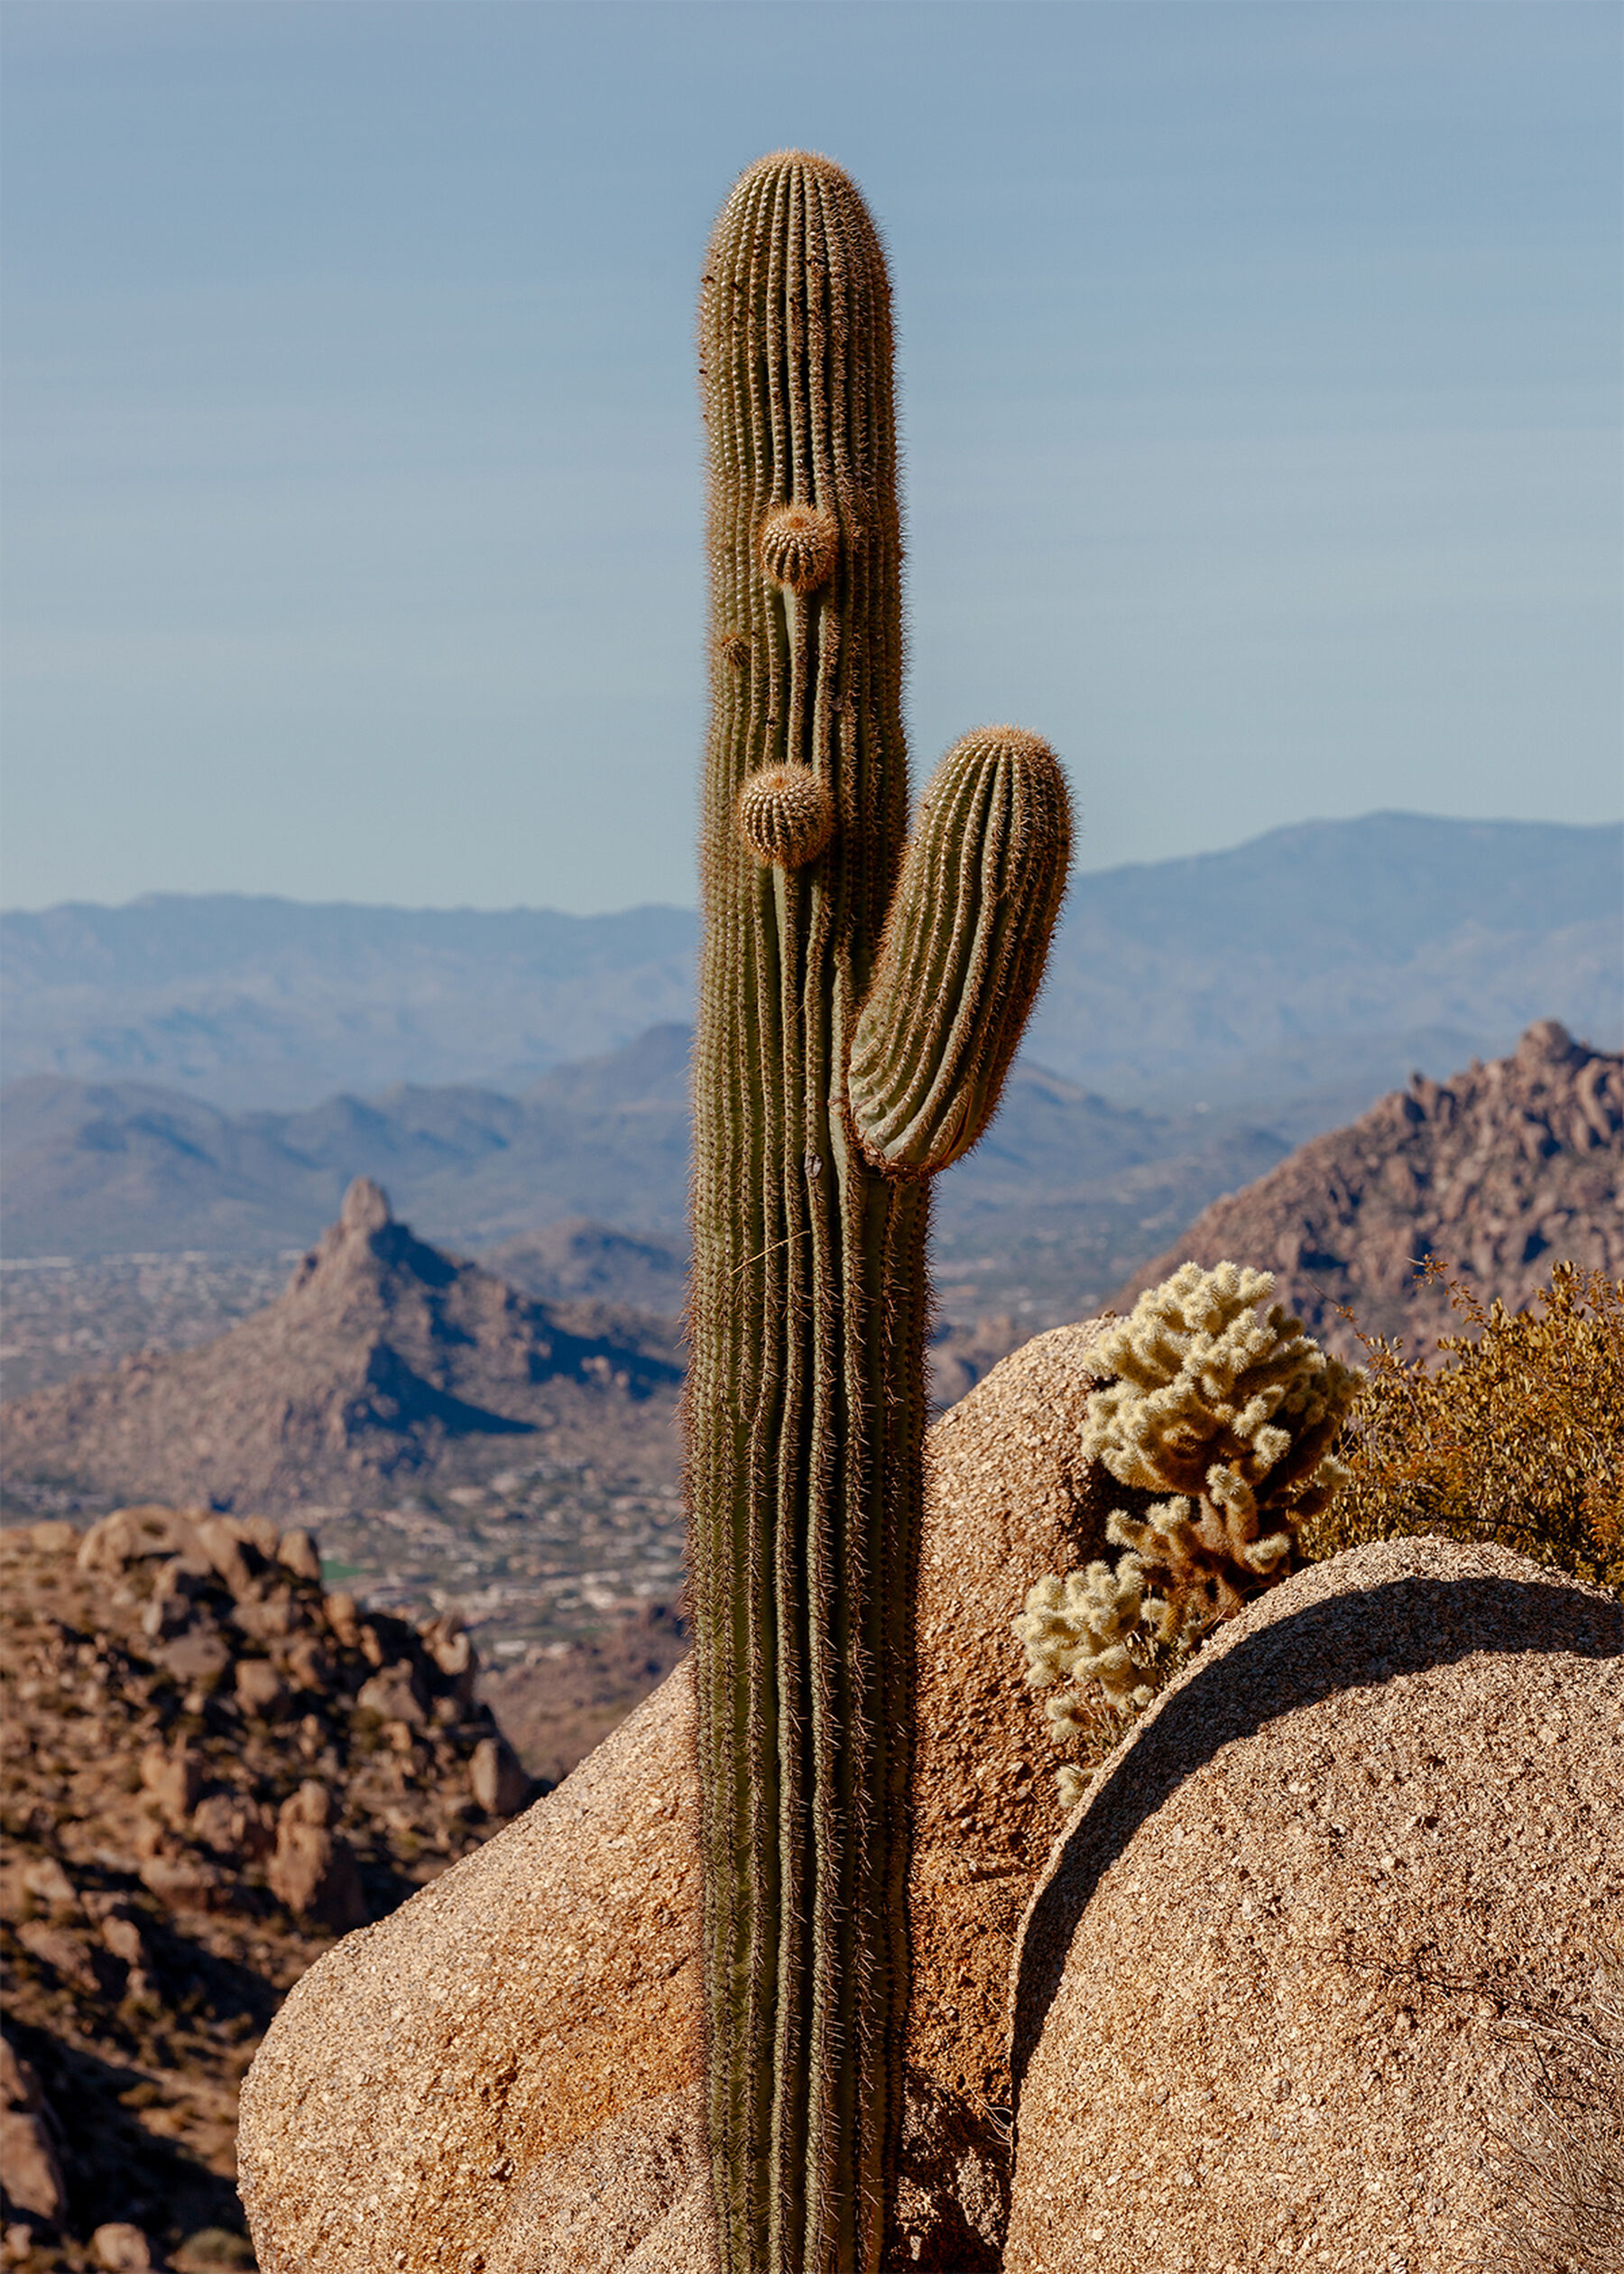 A saguaro cactus stands tall in the center of the frame, in bright daylight, which casts a slender dark shadow across a light colored boulder to the right of its base. In the background are several layers of mountainous terrain, fading out in a haze towar